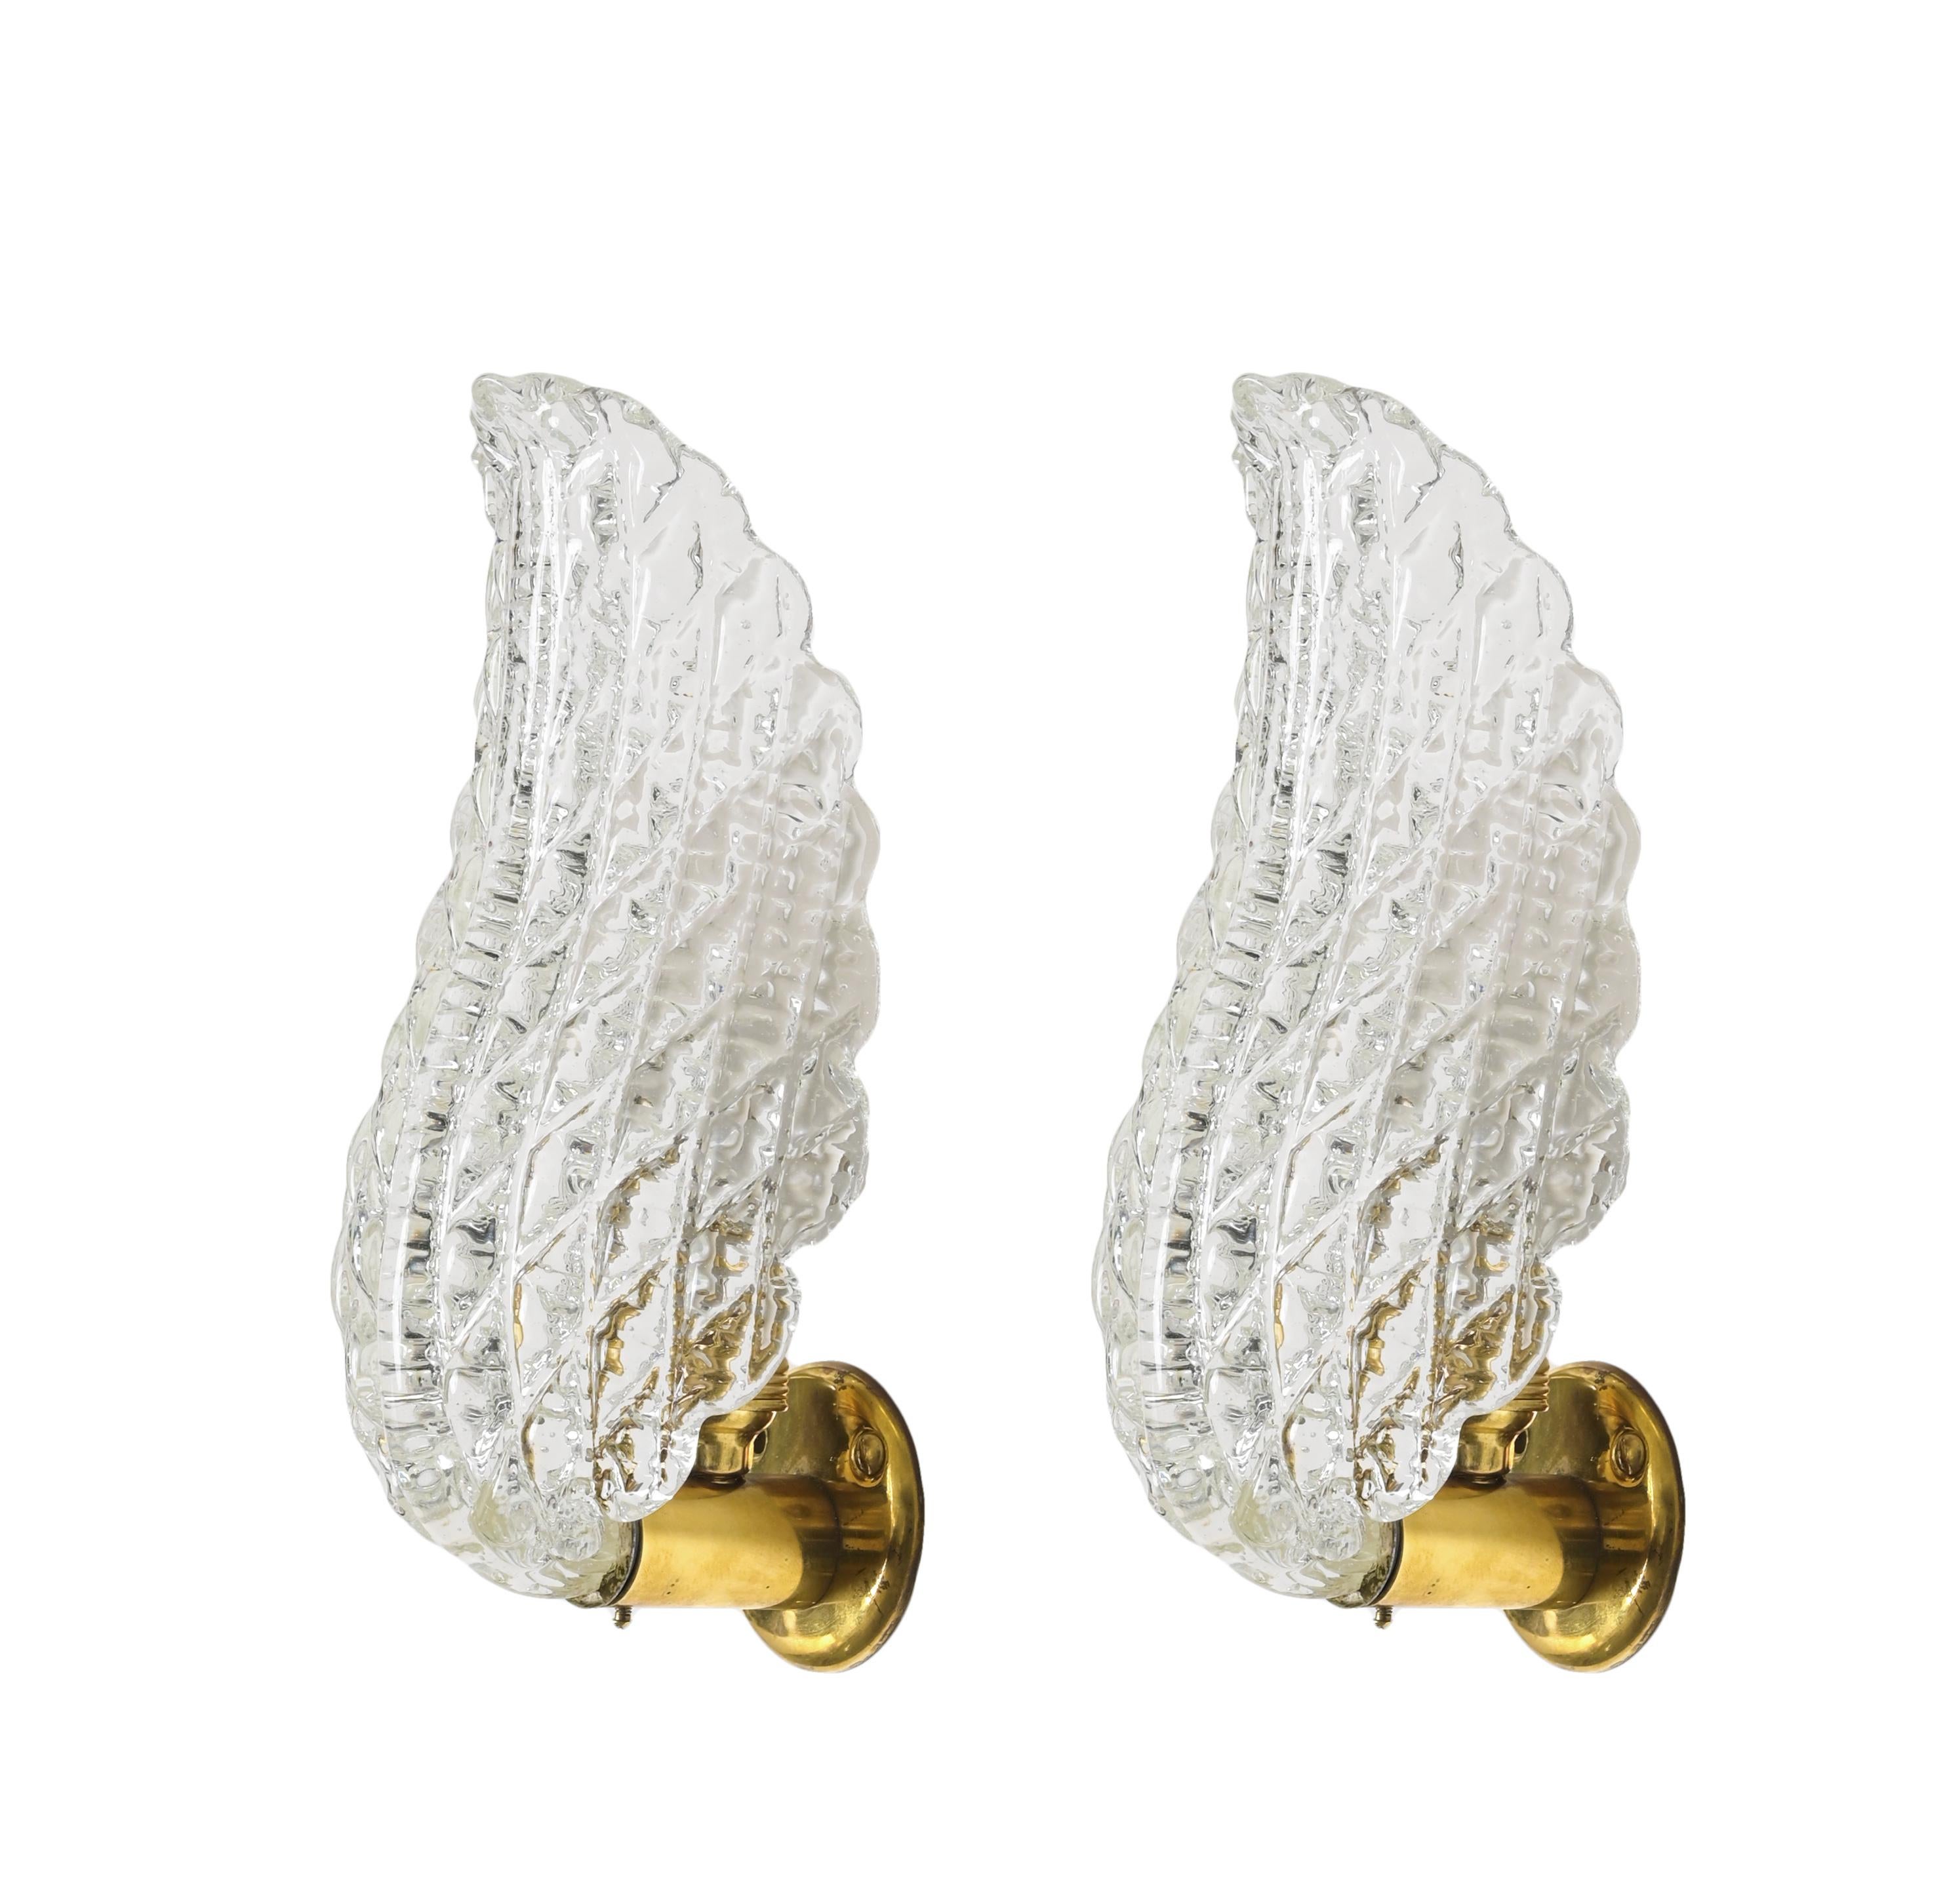 Magnificent pair of mid-century leaf sconces in Murano hand-blown crystal glass and solid brass. These wonderful lights were designed in Italy by Barovier in the 1950s.

These finely crafted Murano sconces recall the the shape of a leaf, with